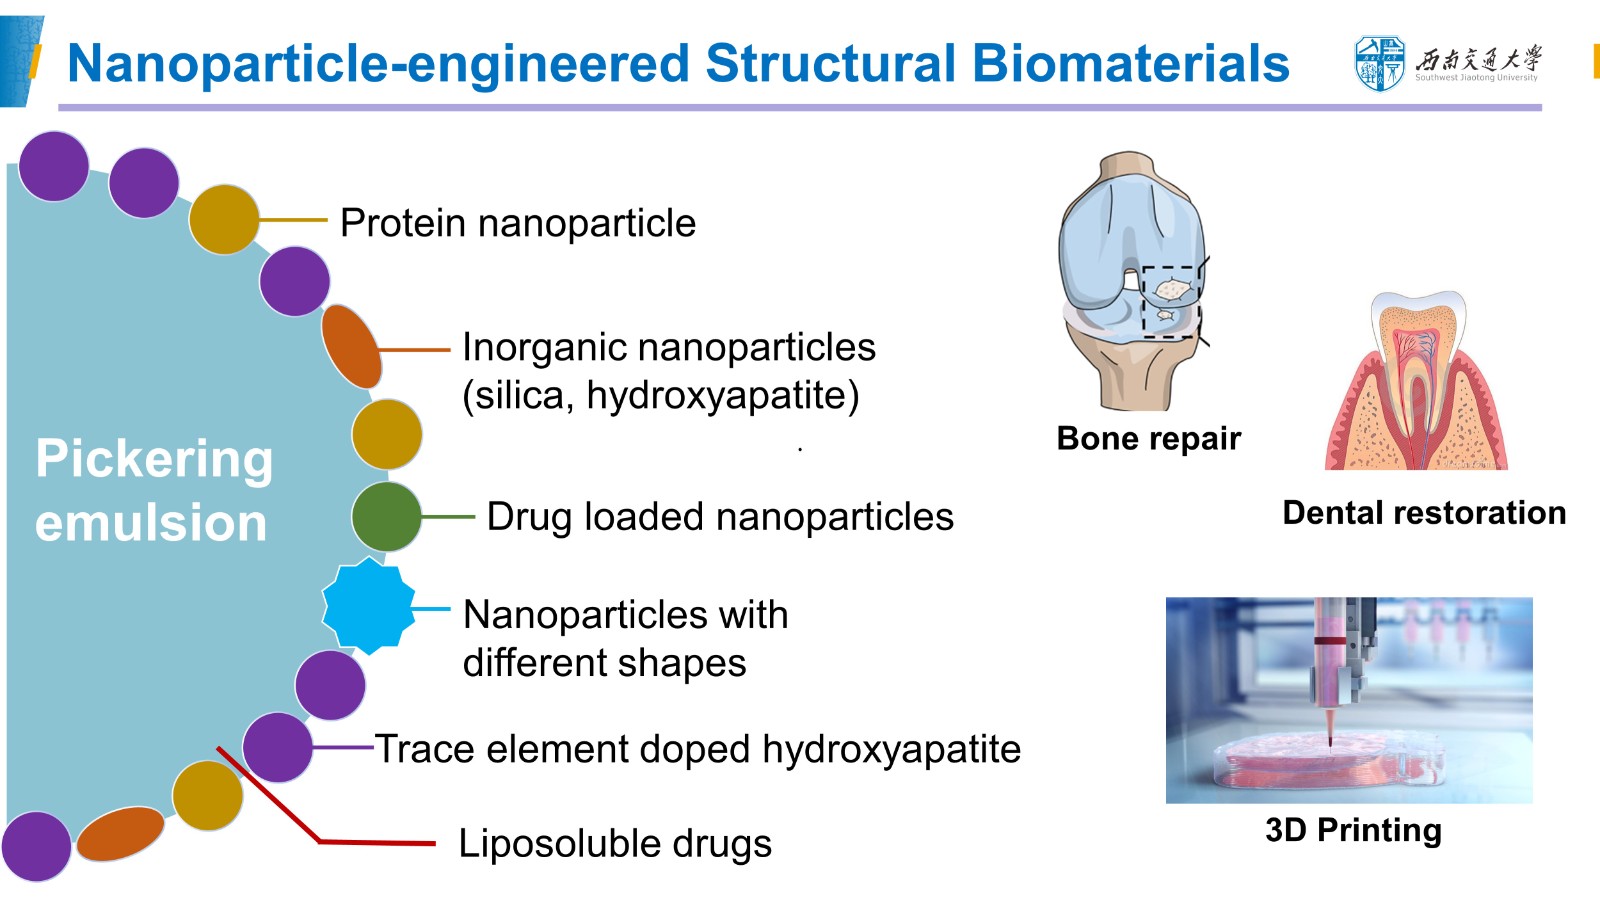 TH-Nanoparticle-Engineered Structural Biomaterials.jpg